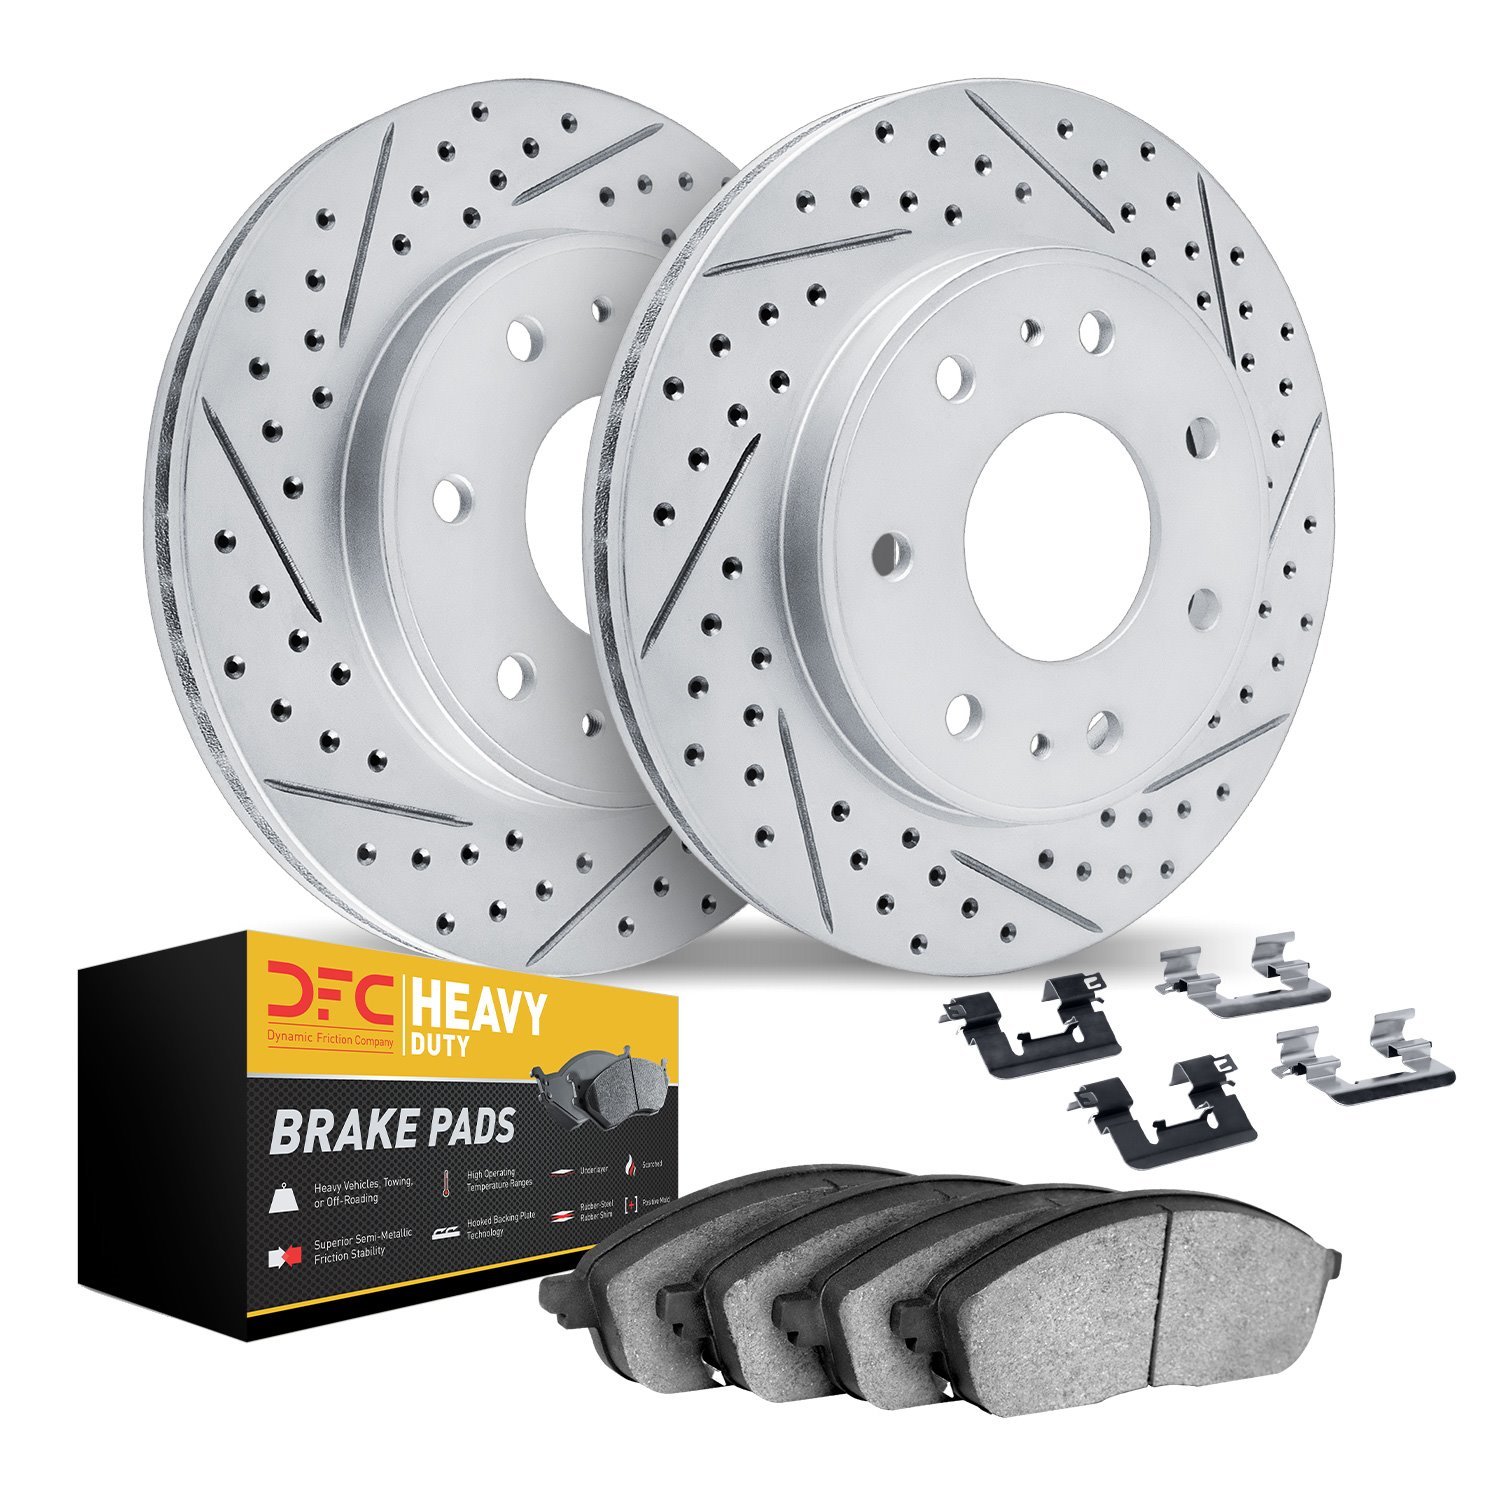 2212-99137 Geoperformance Drilled/Slotted Rotors w/Heavy-Duty Pads Kit & Hardware, 2004-2008 Ford/Lincoln/Mercury/Mazda, Positio